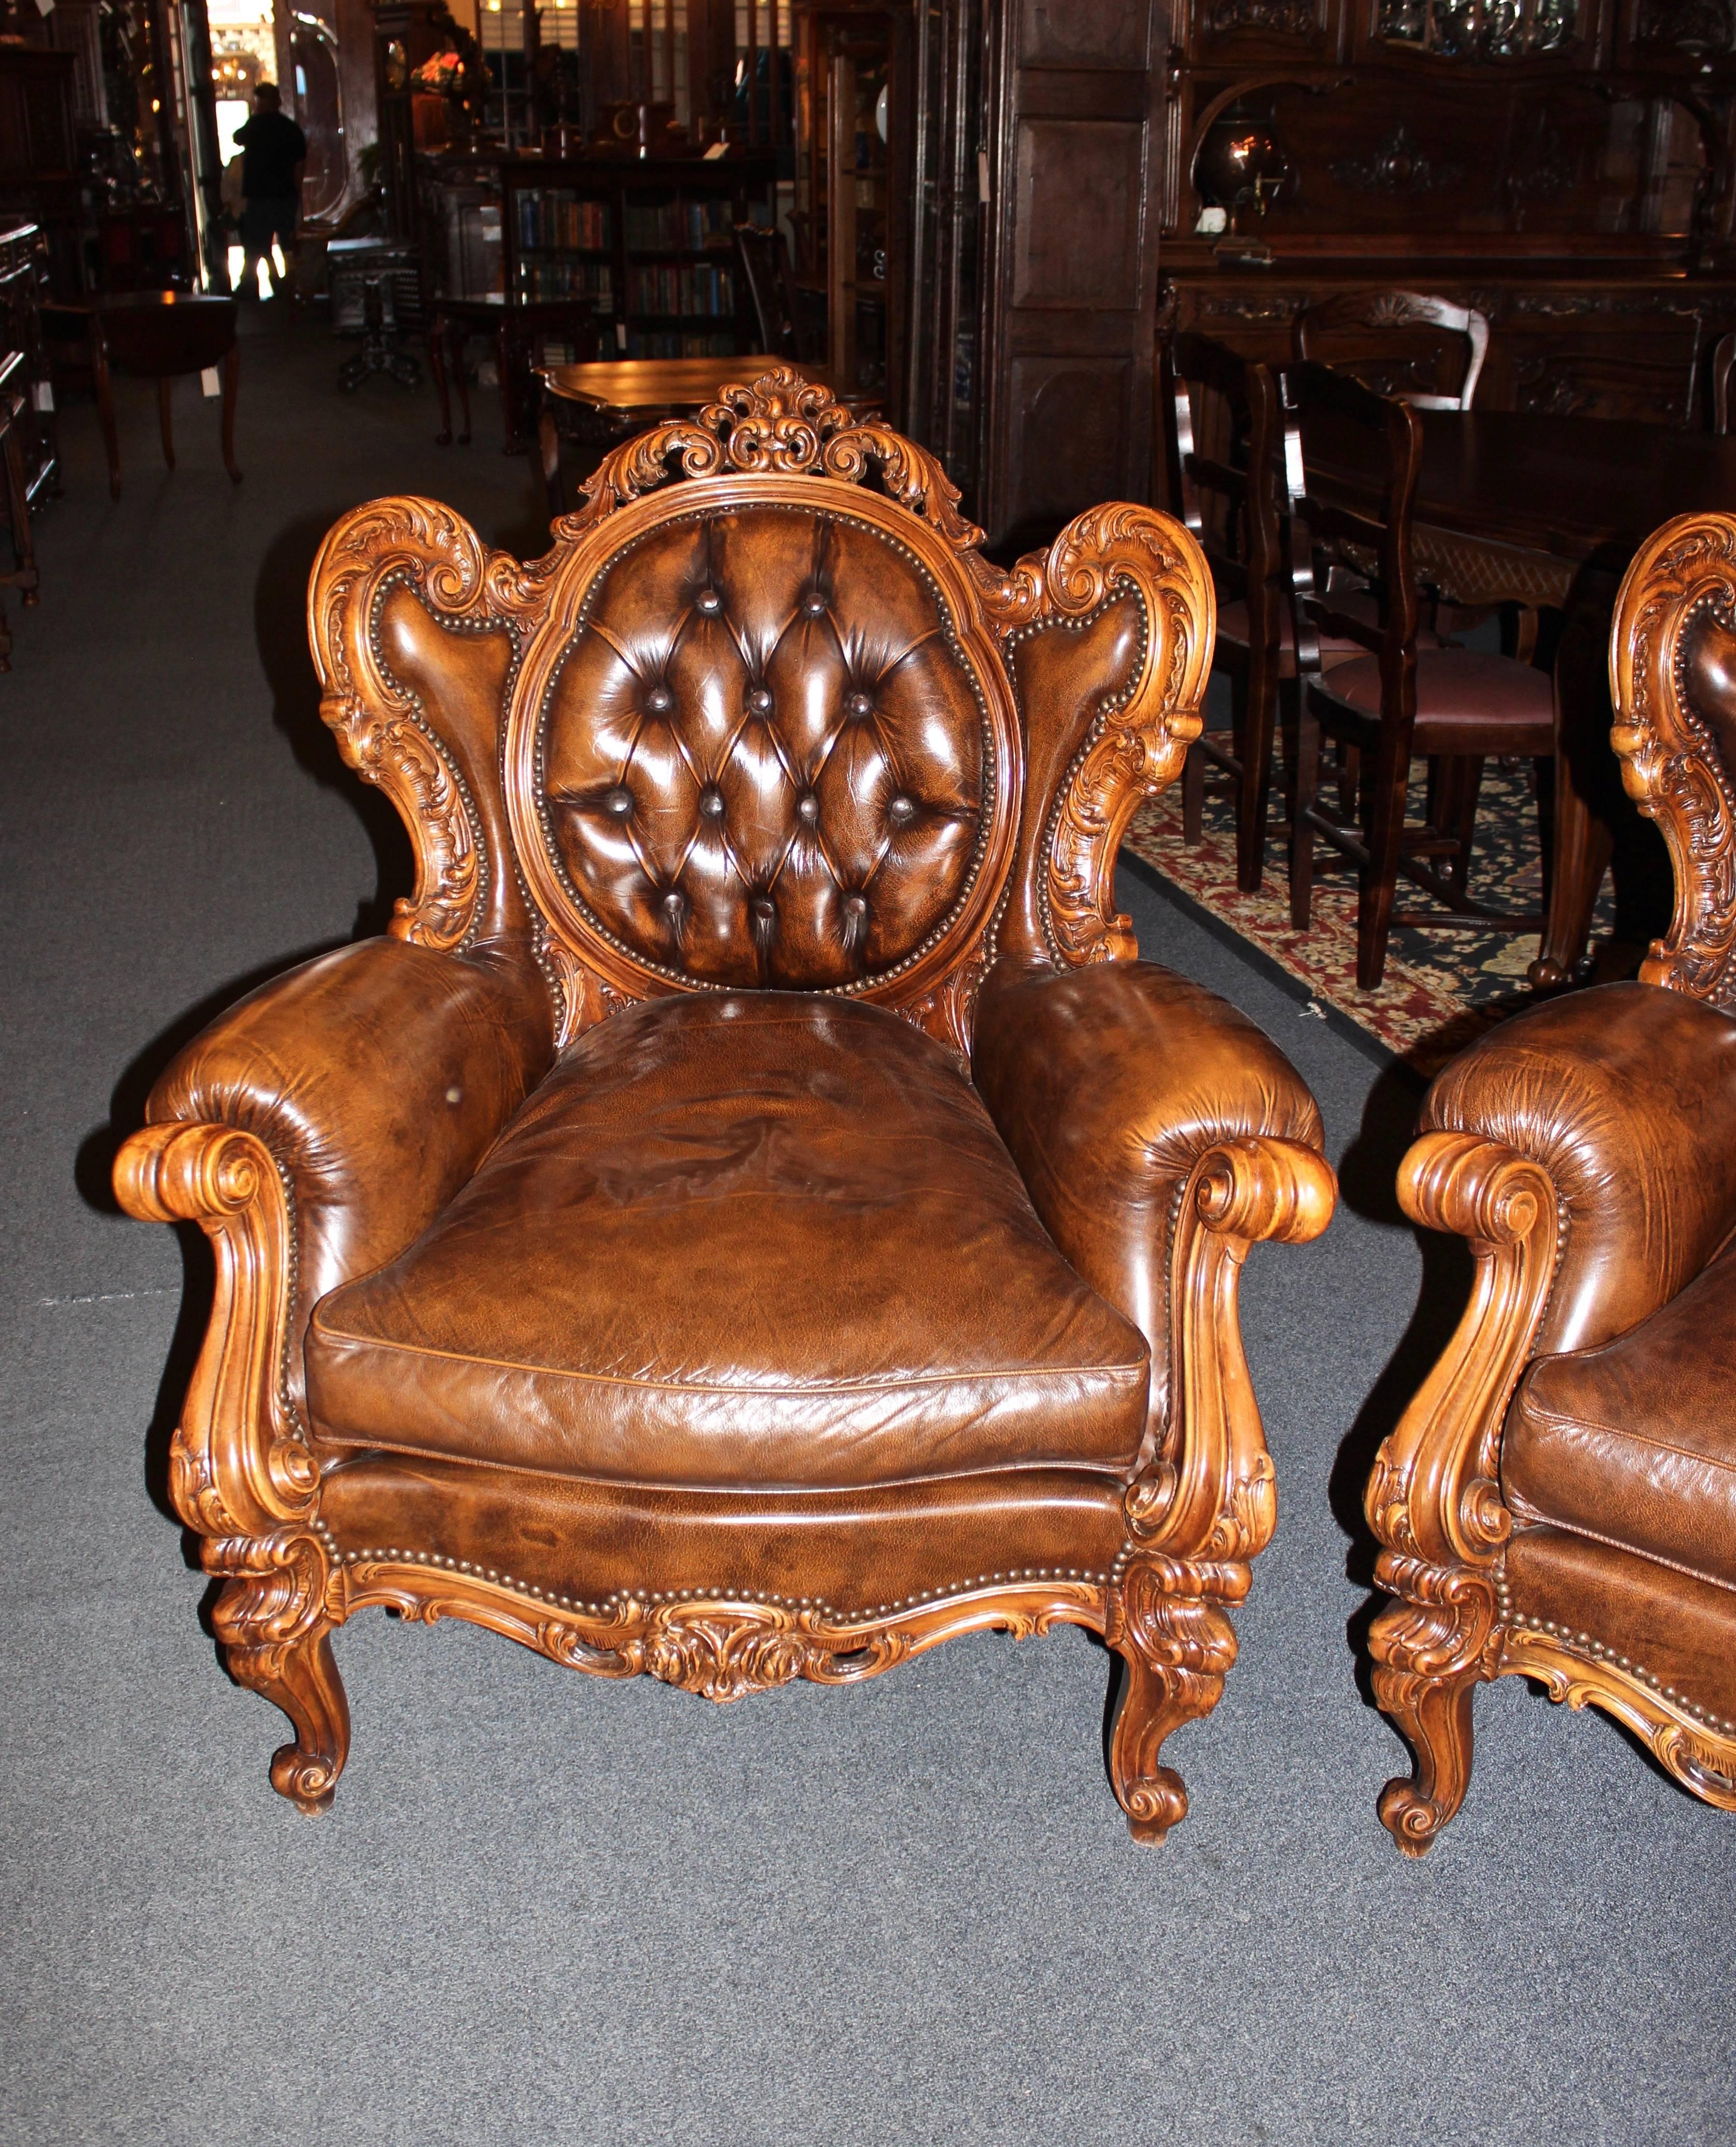 This 20th century French parlour set is made in the Rococo style and includes one sofa and two side chairs. Features gorgeously hand-carved walnut and the original tufted leather. Upholstery stud accents. Sofa measures approximate 38" D x